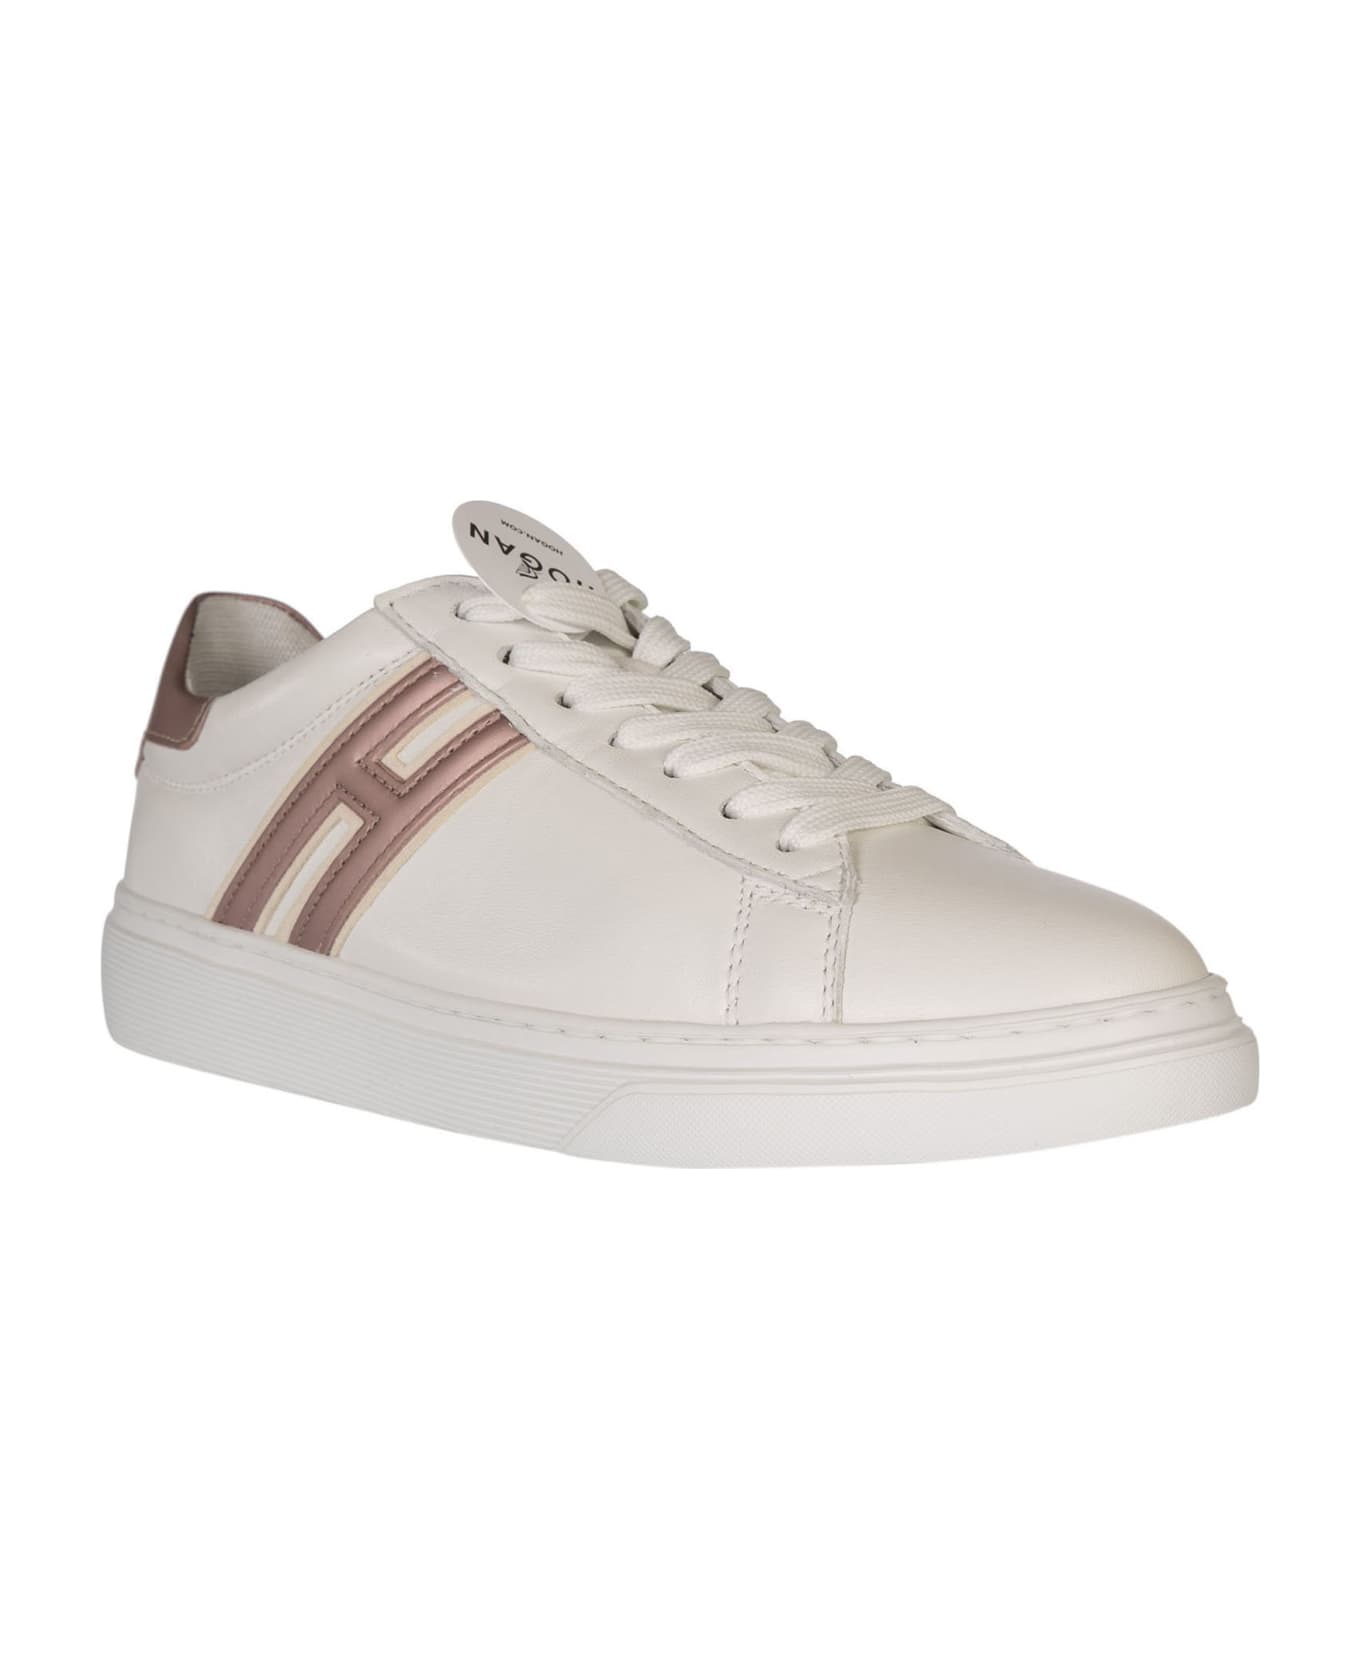 Hogan H365 Canaletto Sneakers